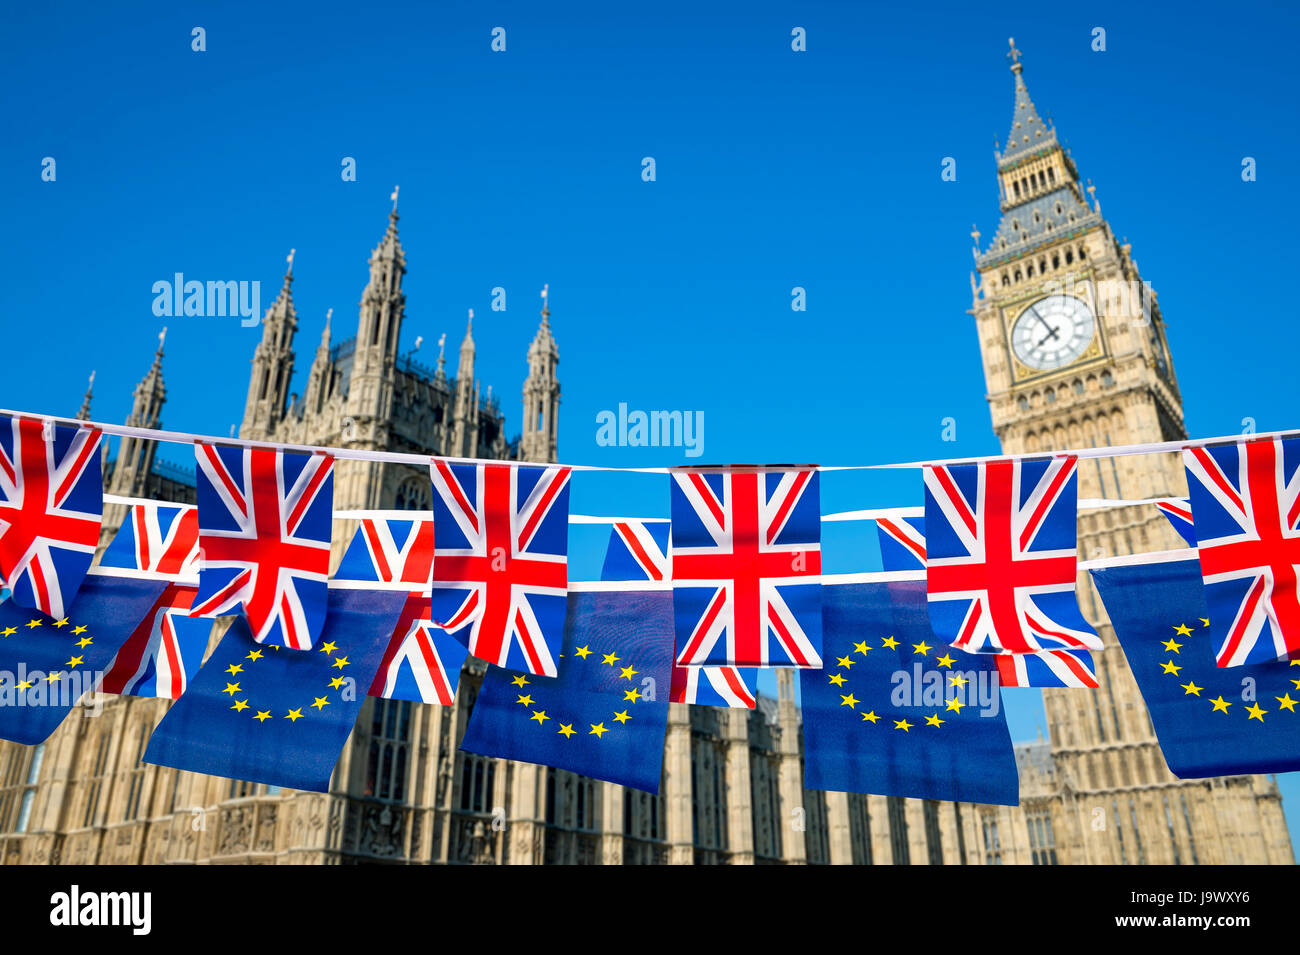 United Kingdom and European Union flag bunting flying together in a spirit of Brexit cooperation at the Houses of Parliament, Westminster, London Stock Photo